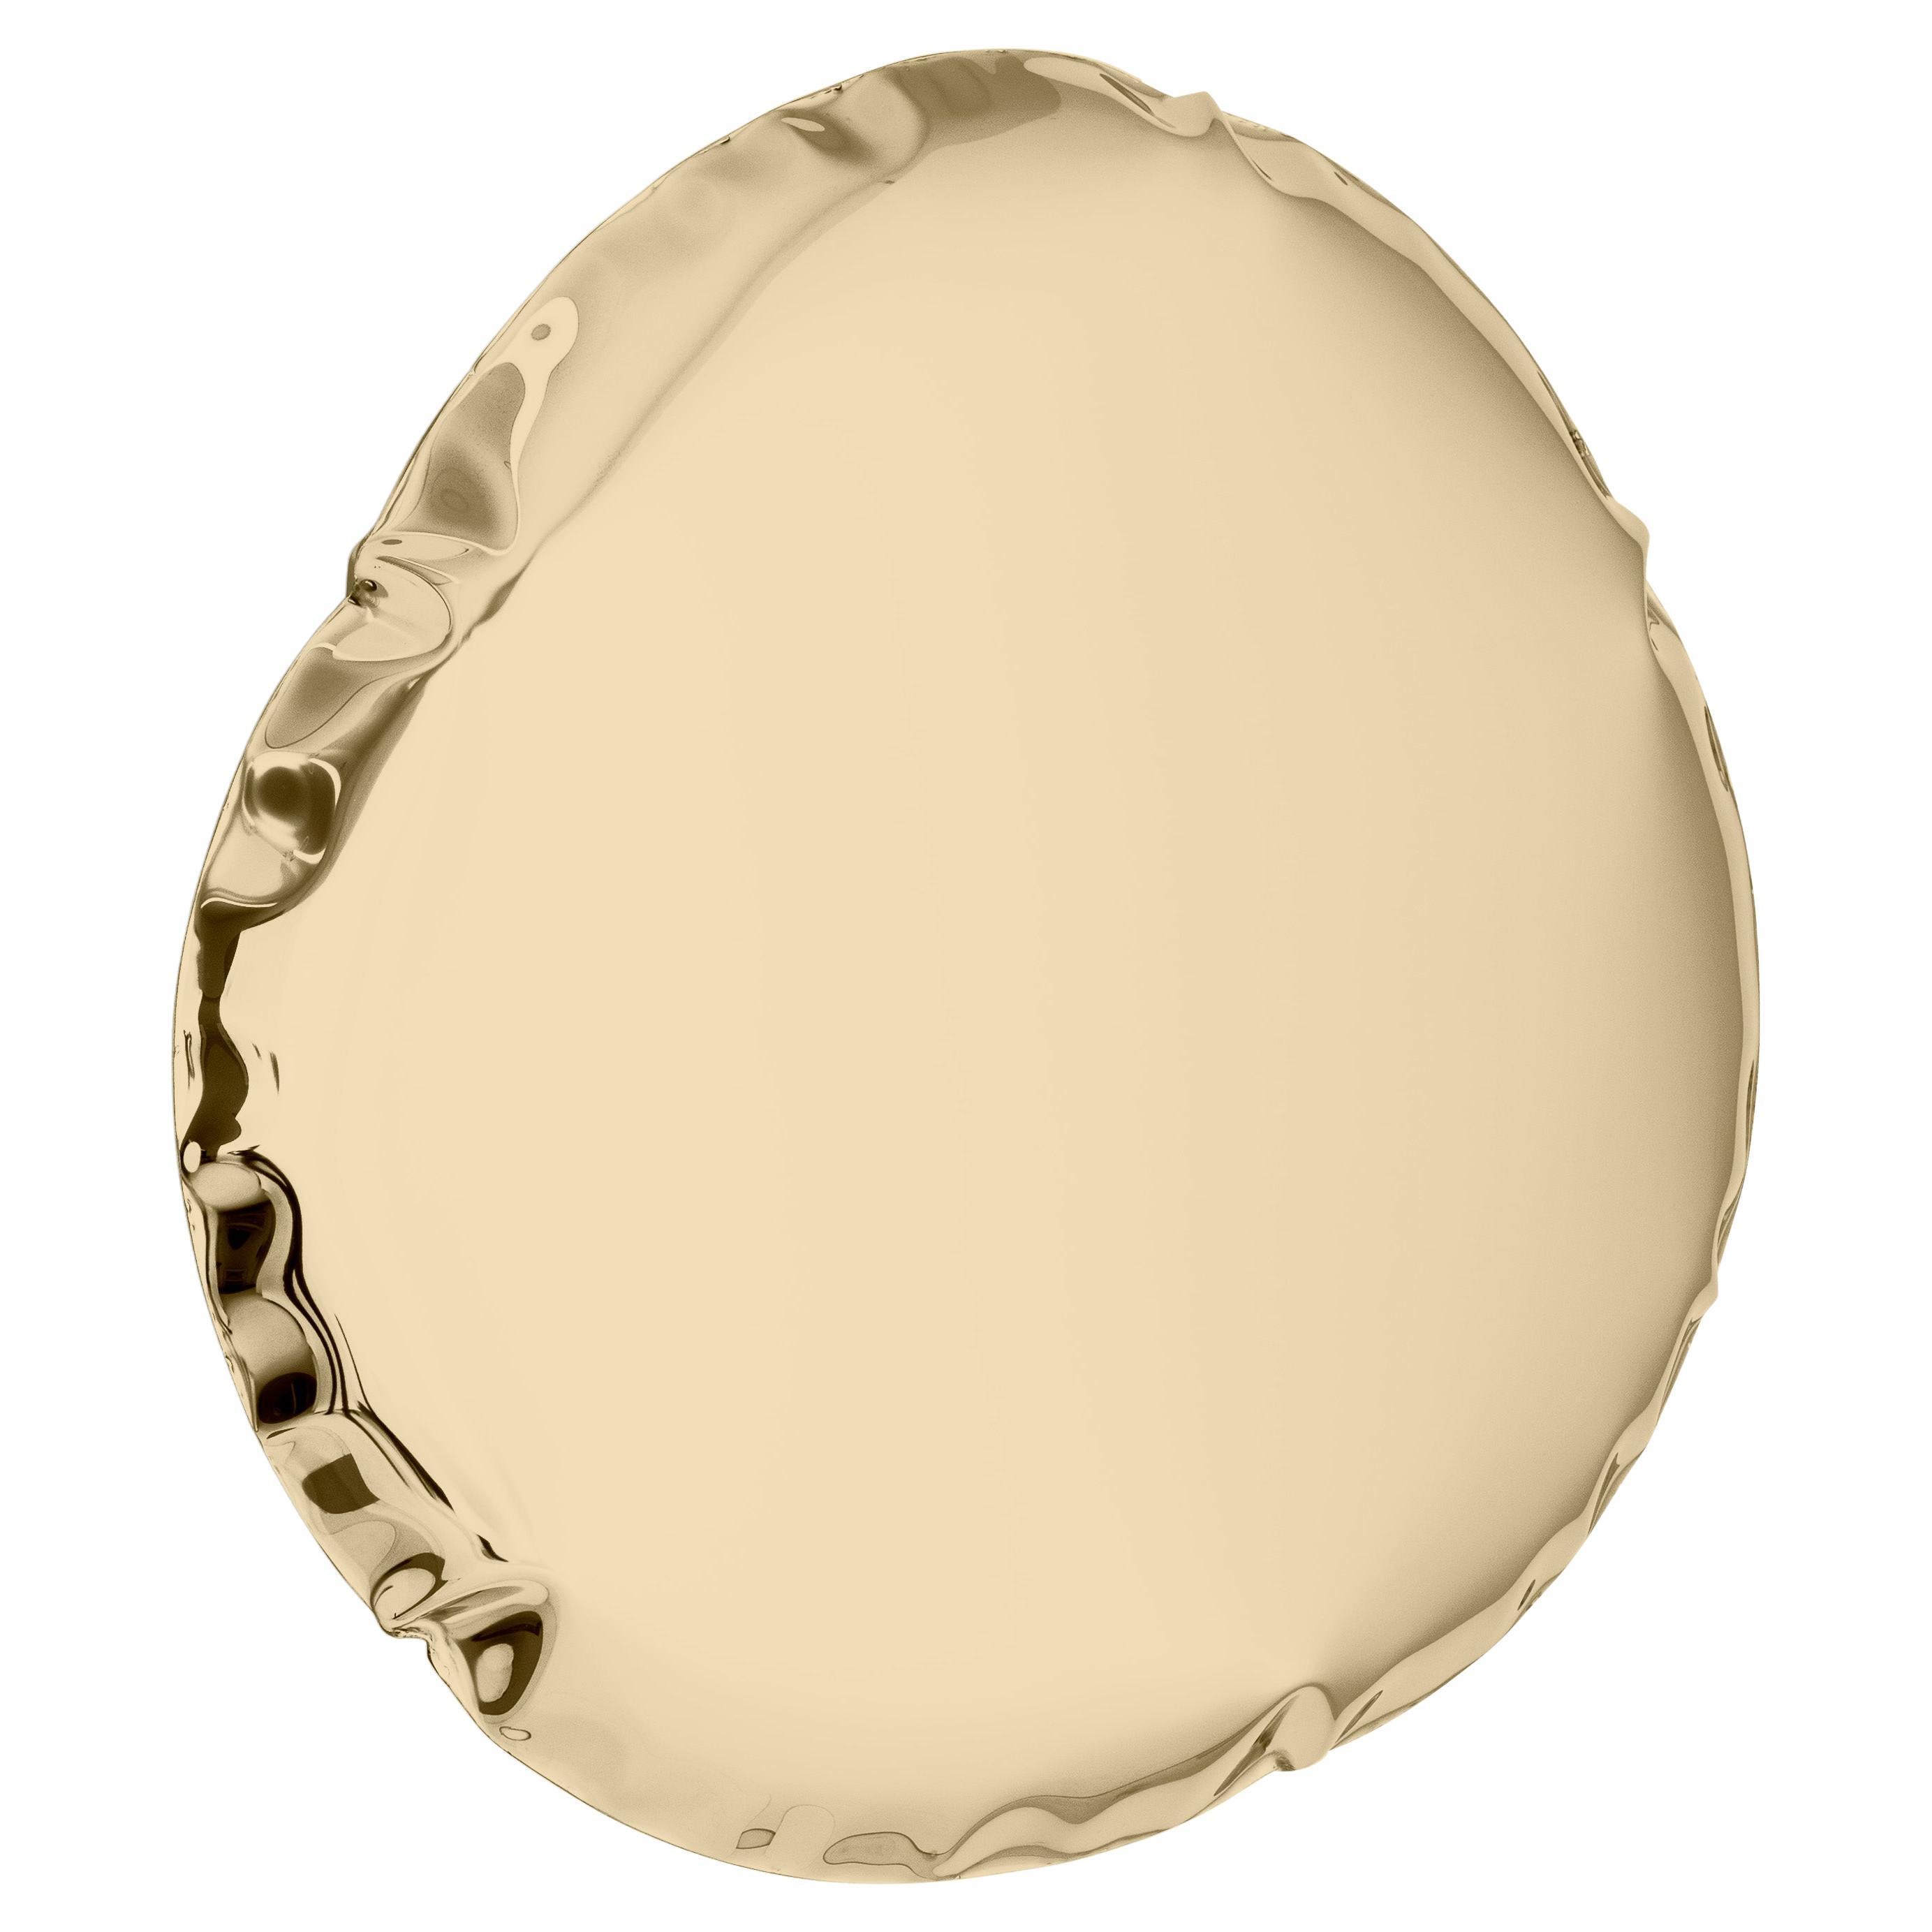 Tafla O6 Polished Stainless Steel Classic Gold Color Wall Mirror by Zieta For Sale